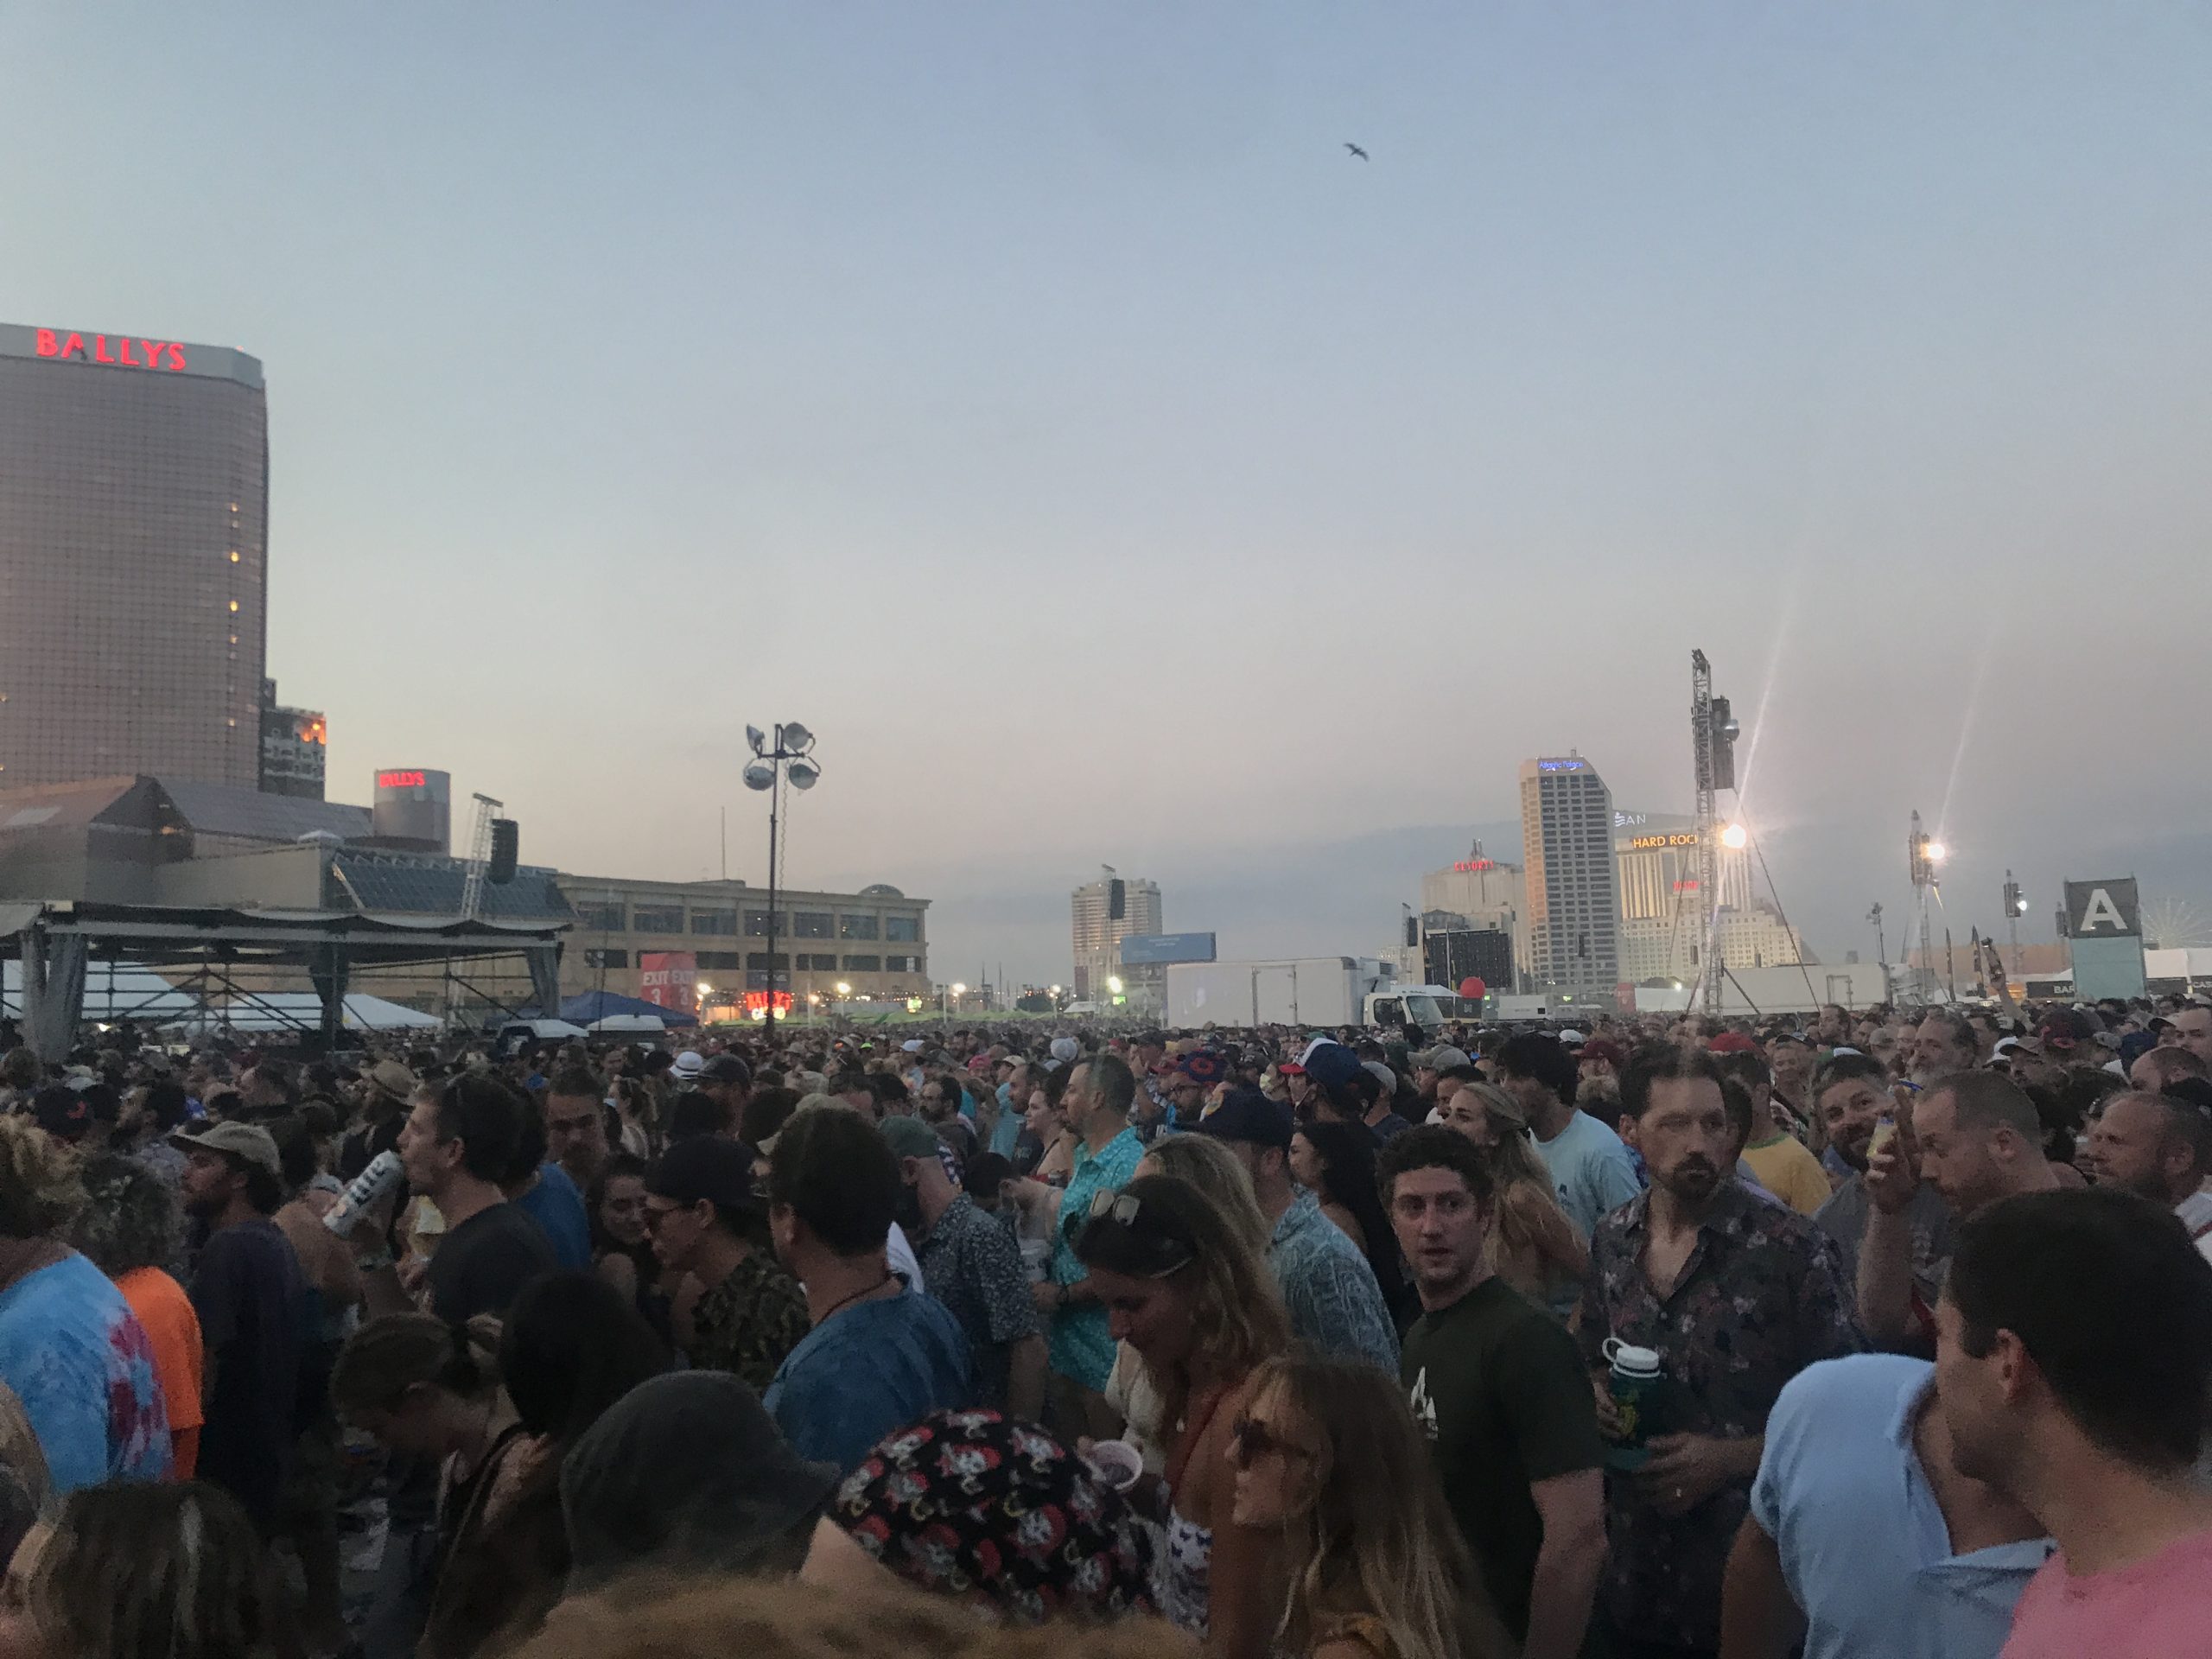 The crowd for Phish night two, Saturday, Aug. 14, 2021 on the beach in Atlantic City, New Jersey (Shaun R. Smith/ The High Note).